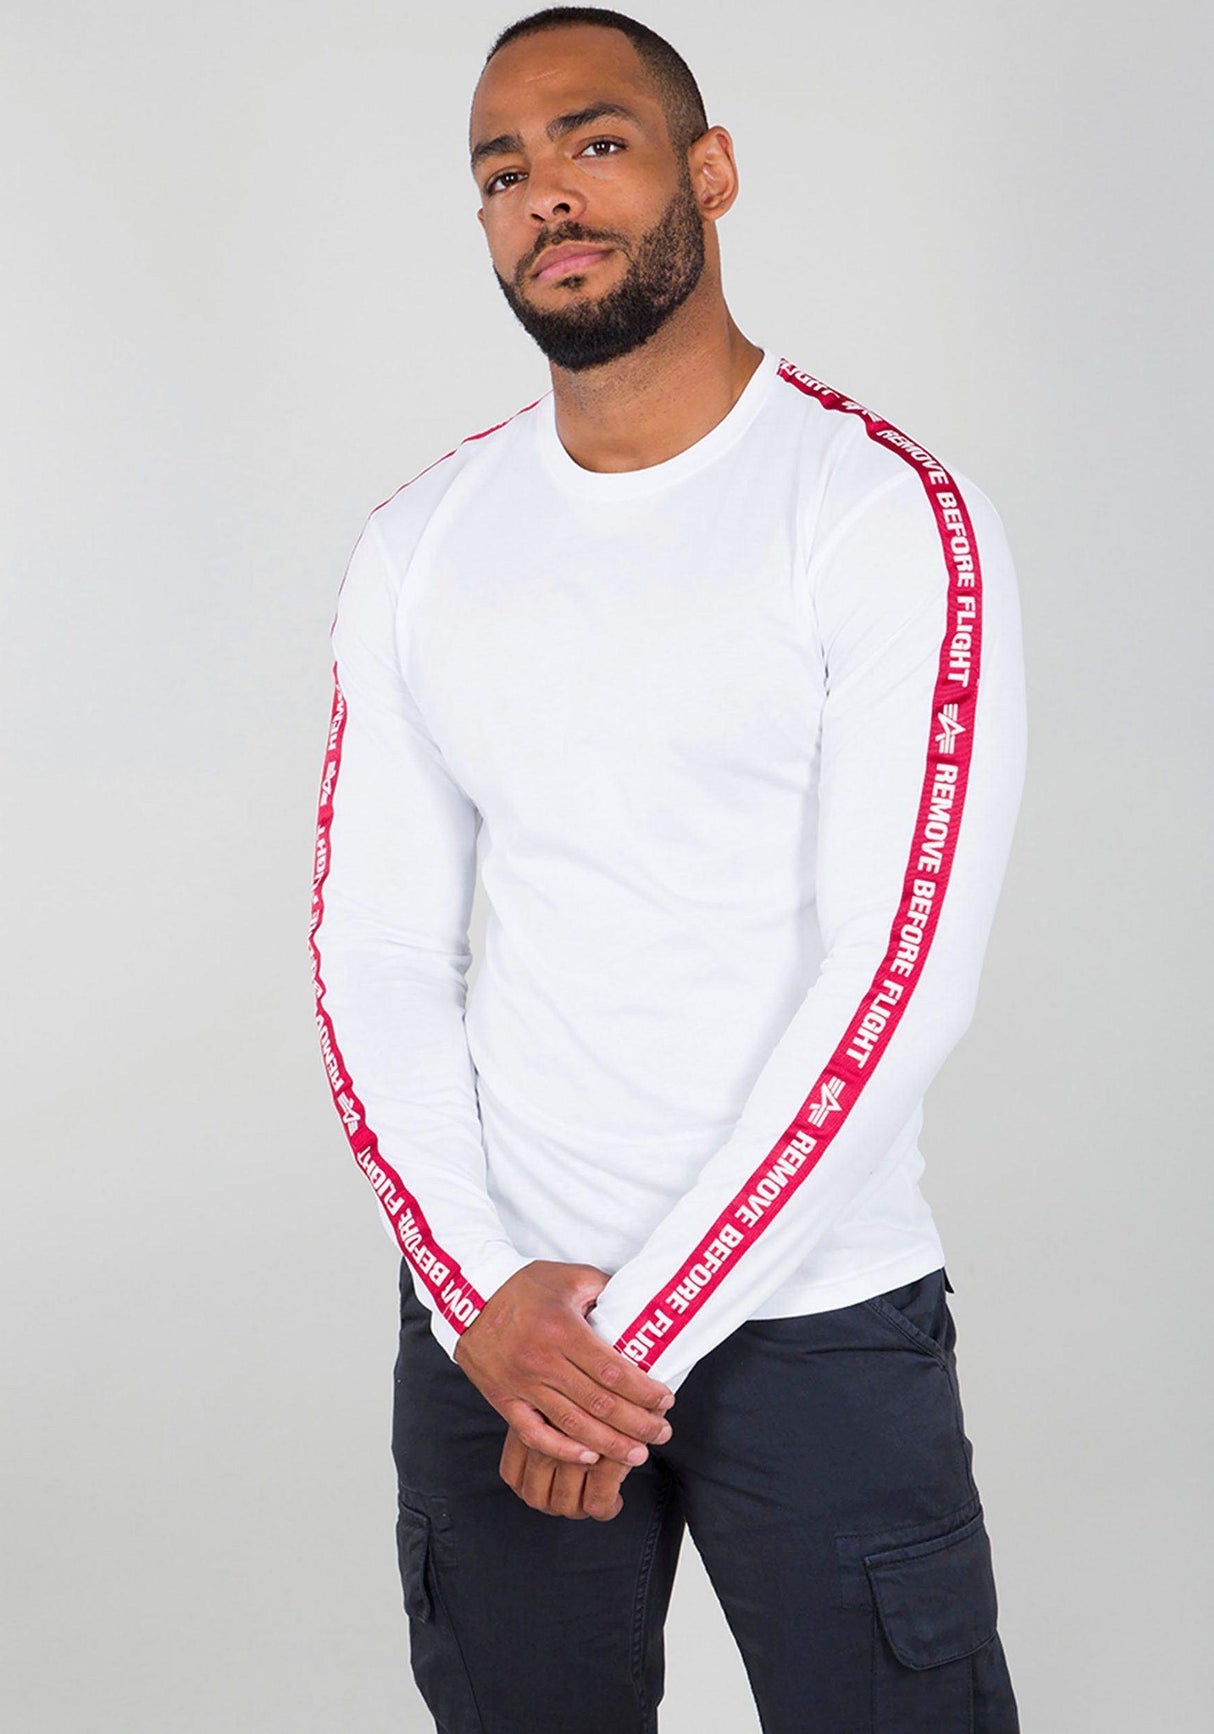 t-shirt remove before flight - blanc - manches longues